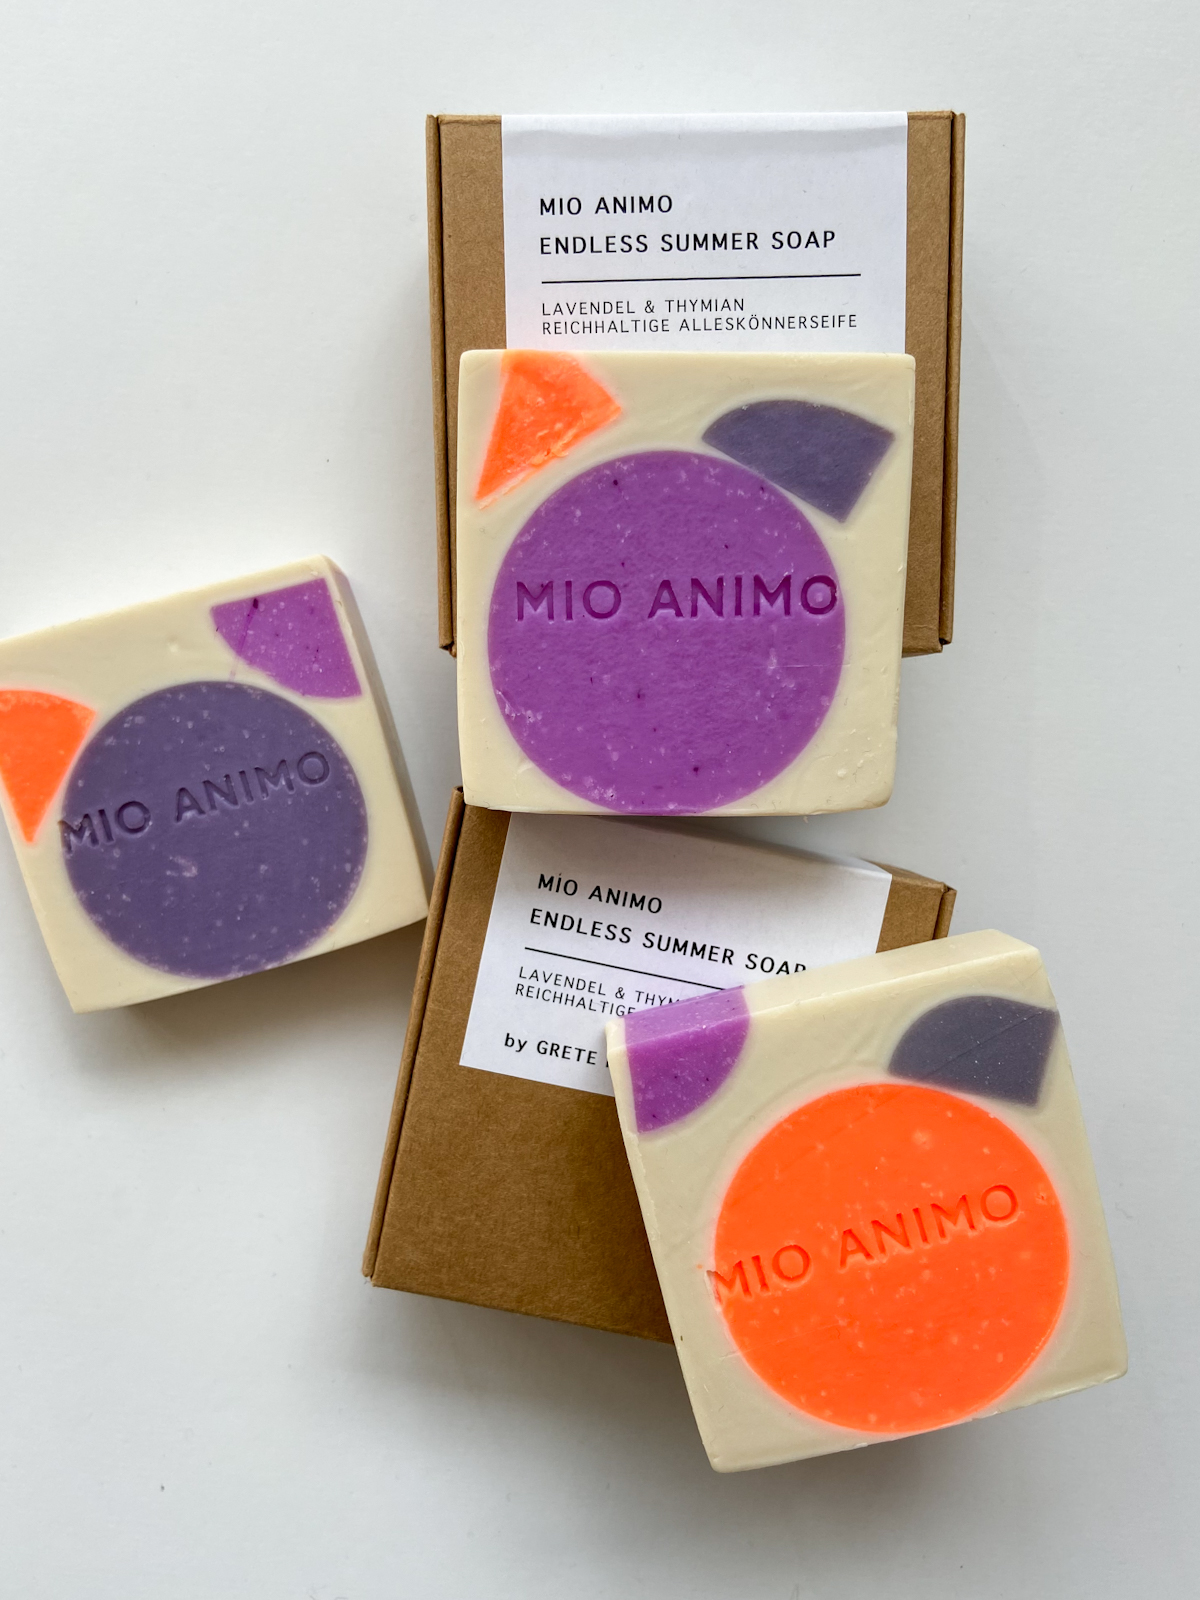 MIO ANIMO - ENDLESS SUMMER SOAP - Limited Edition